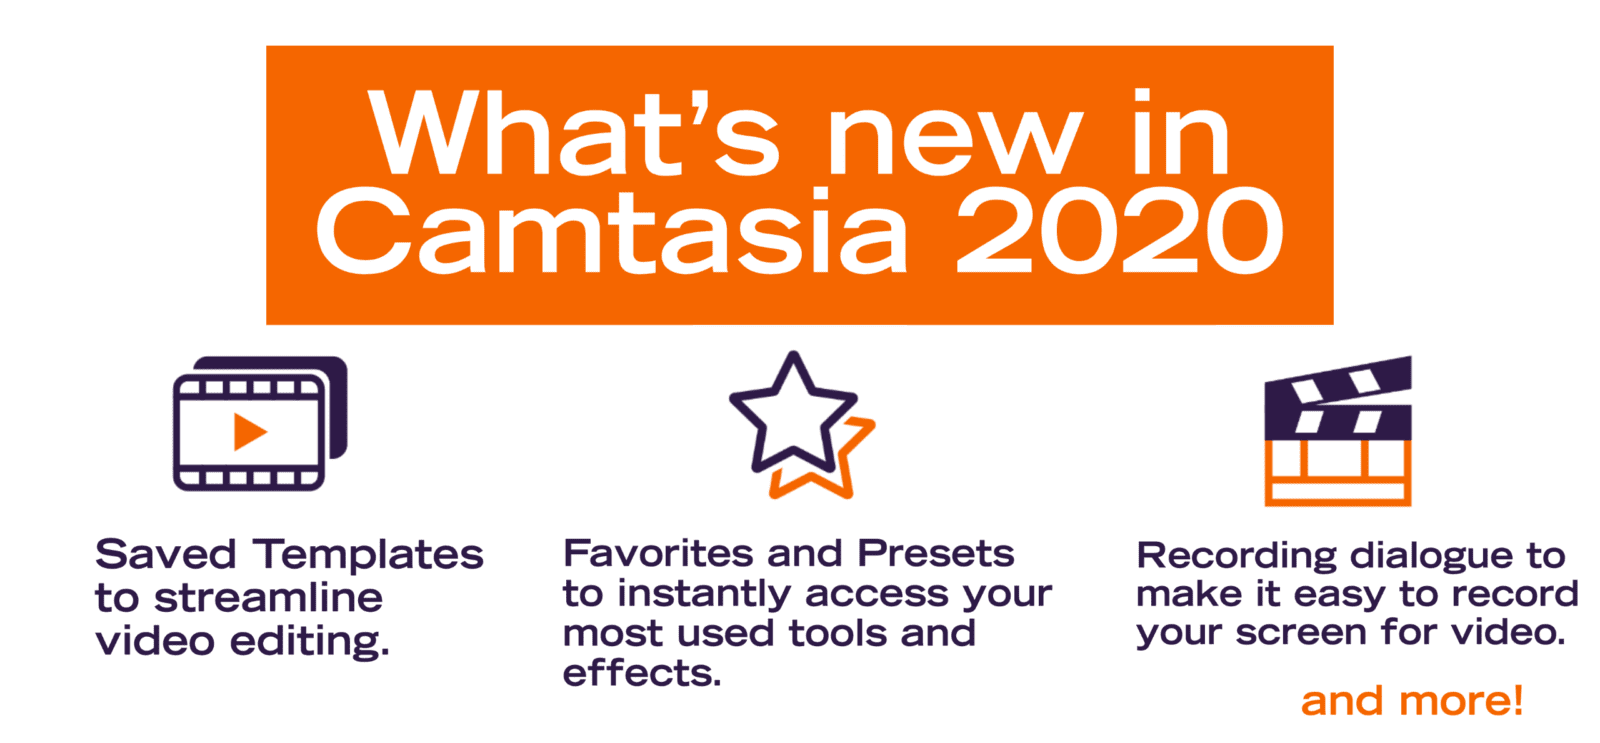 A graphic showing updates to Camtastia 2020, including saved templates, presets and recording dialogue.